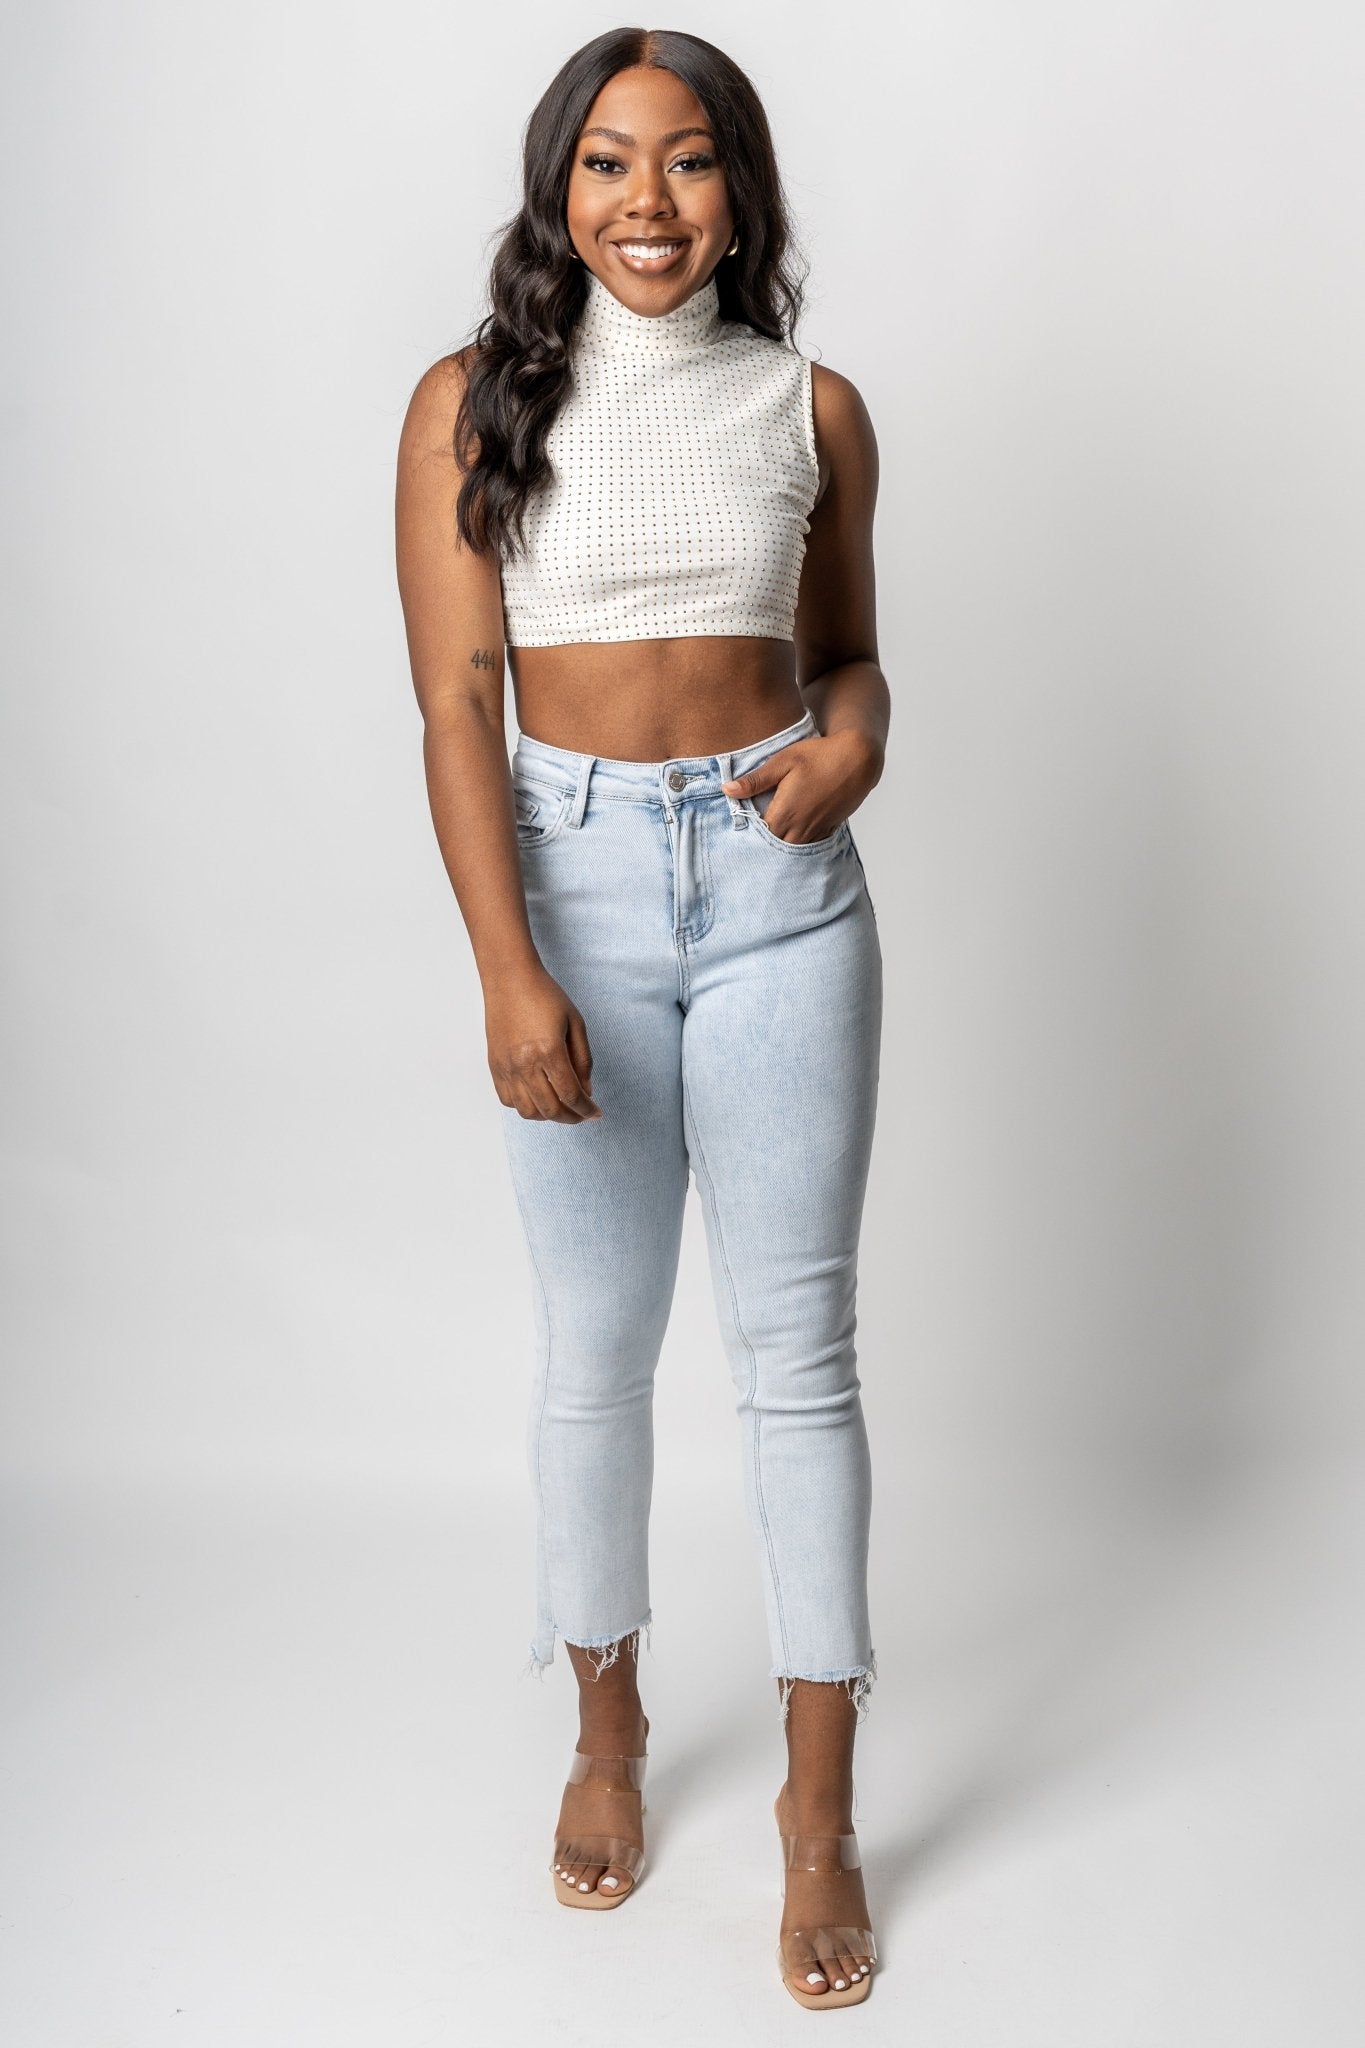 Rhinestone mock neck crop top white - Exclusive Collection of Holiday Inspired T-Shirts and Hoodies at Lush Fashion Lounge Boutique in Oklahoma City